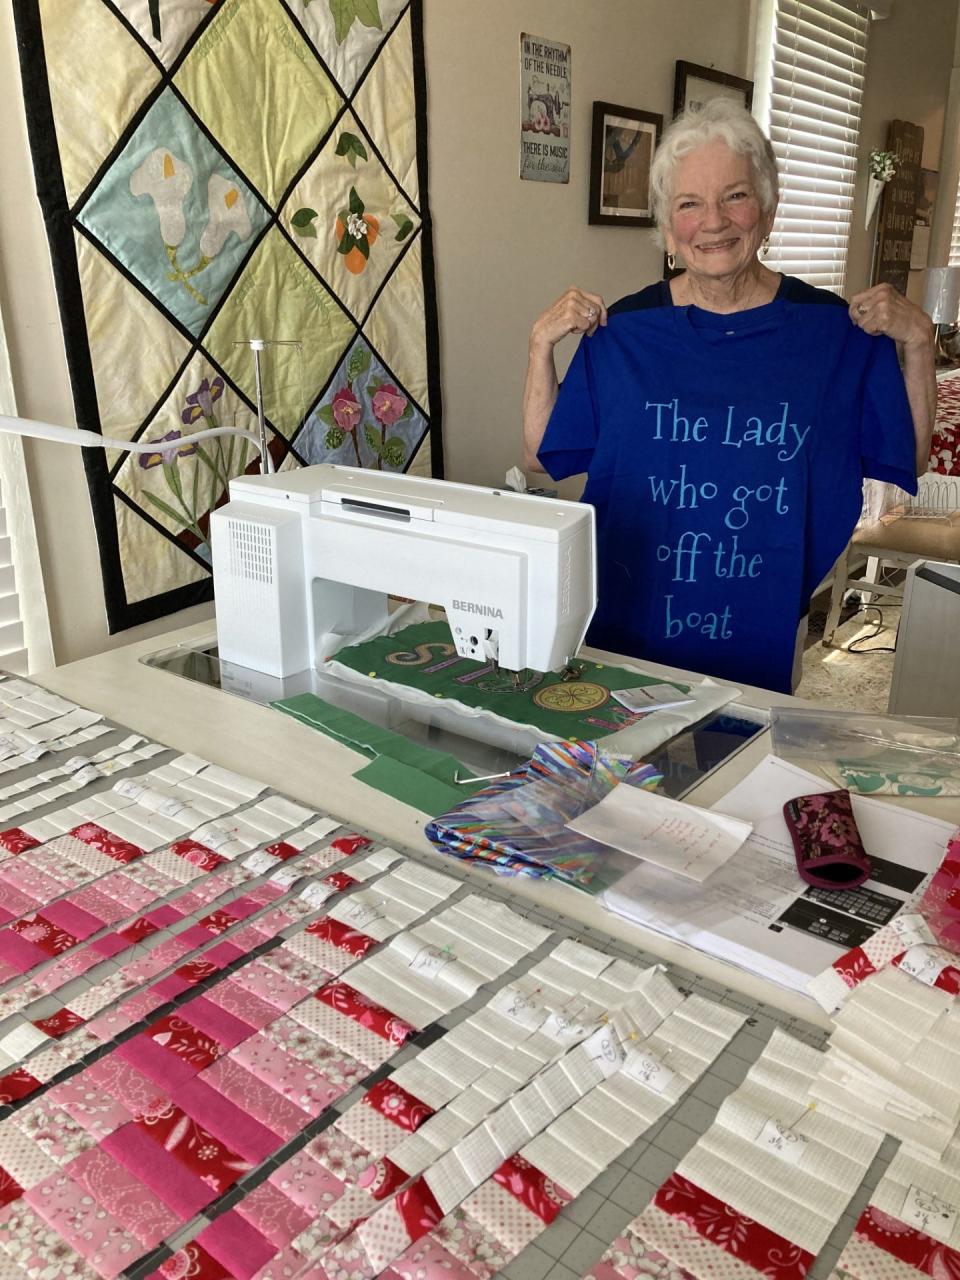 Jackie Calvert with her “celebrity” T-shirt, posing in her sewing studio at one of the homes she purchased near downtown Henderson after a riverboat cruise stop inspired her to move from Florida.